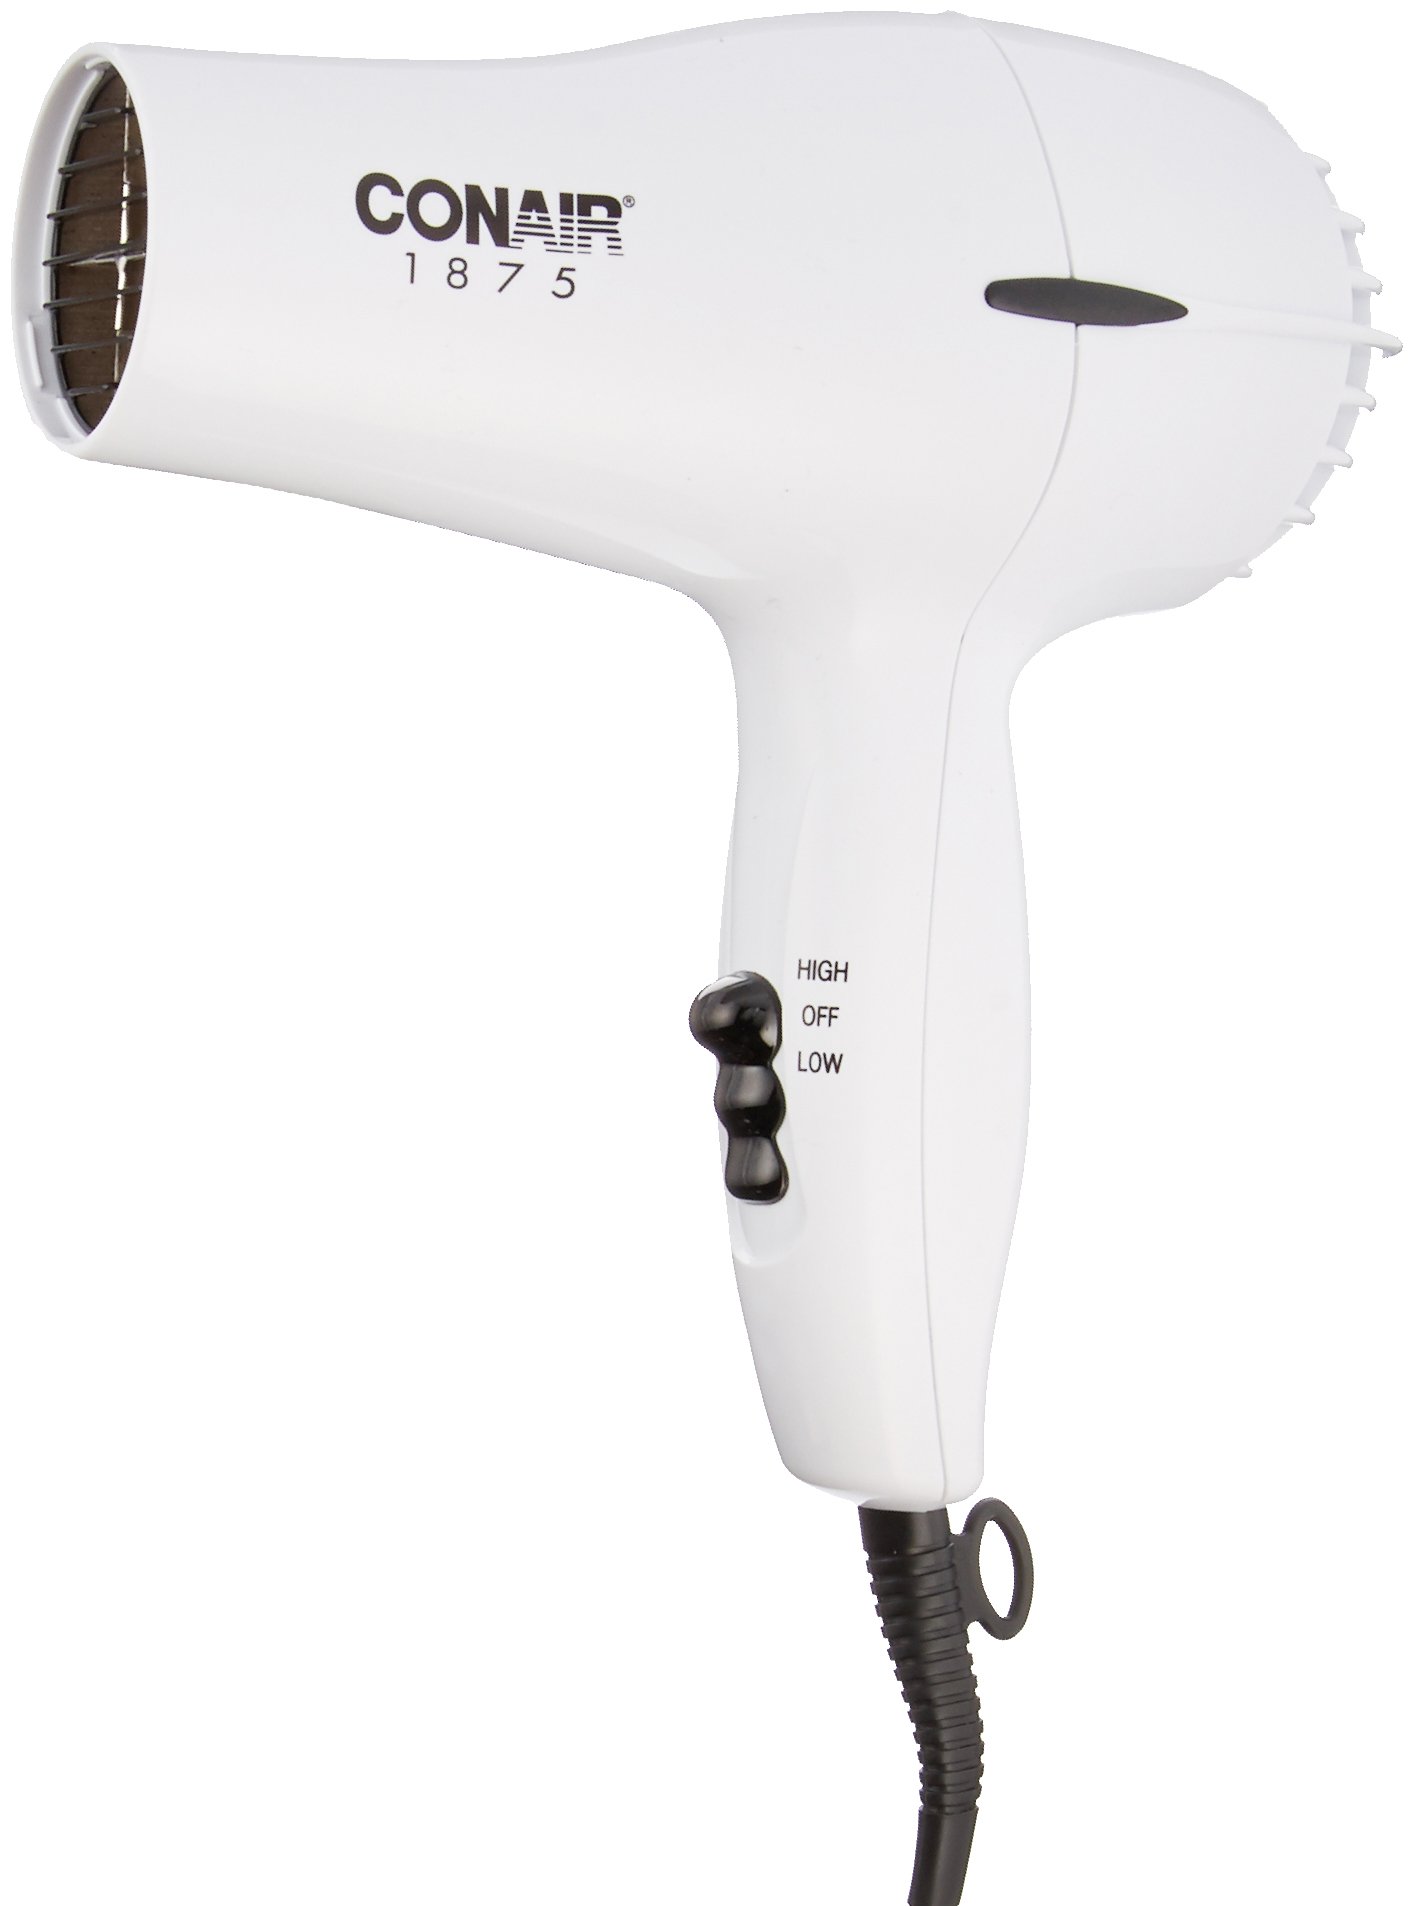 Conair 1875W Mid-Size Blow Dryer (White) $8.90 + Free Shipping w/ Prime or on $25+